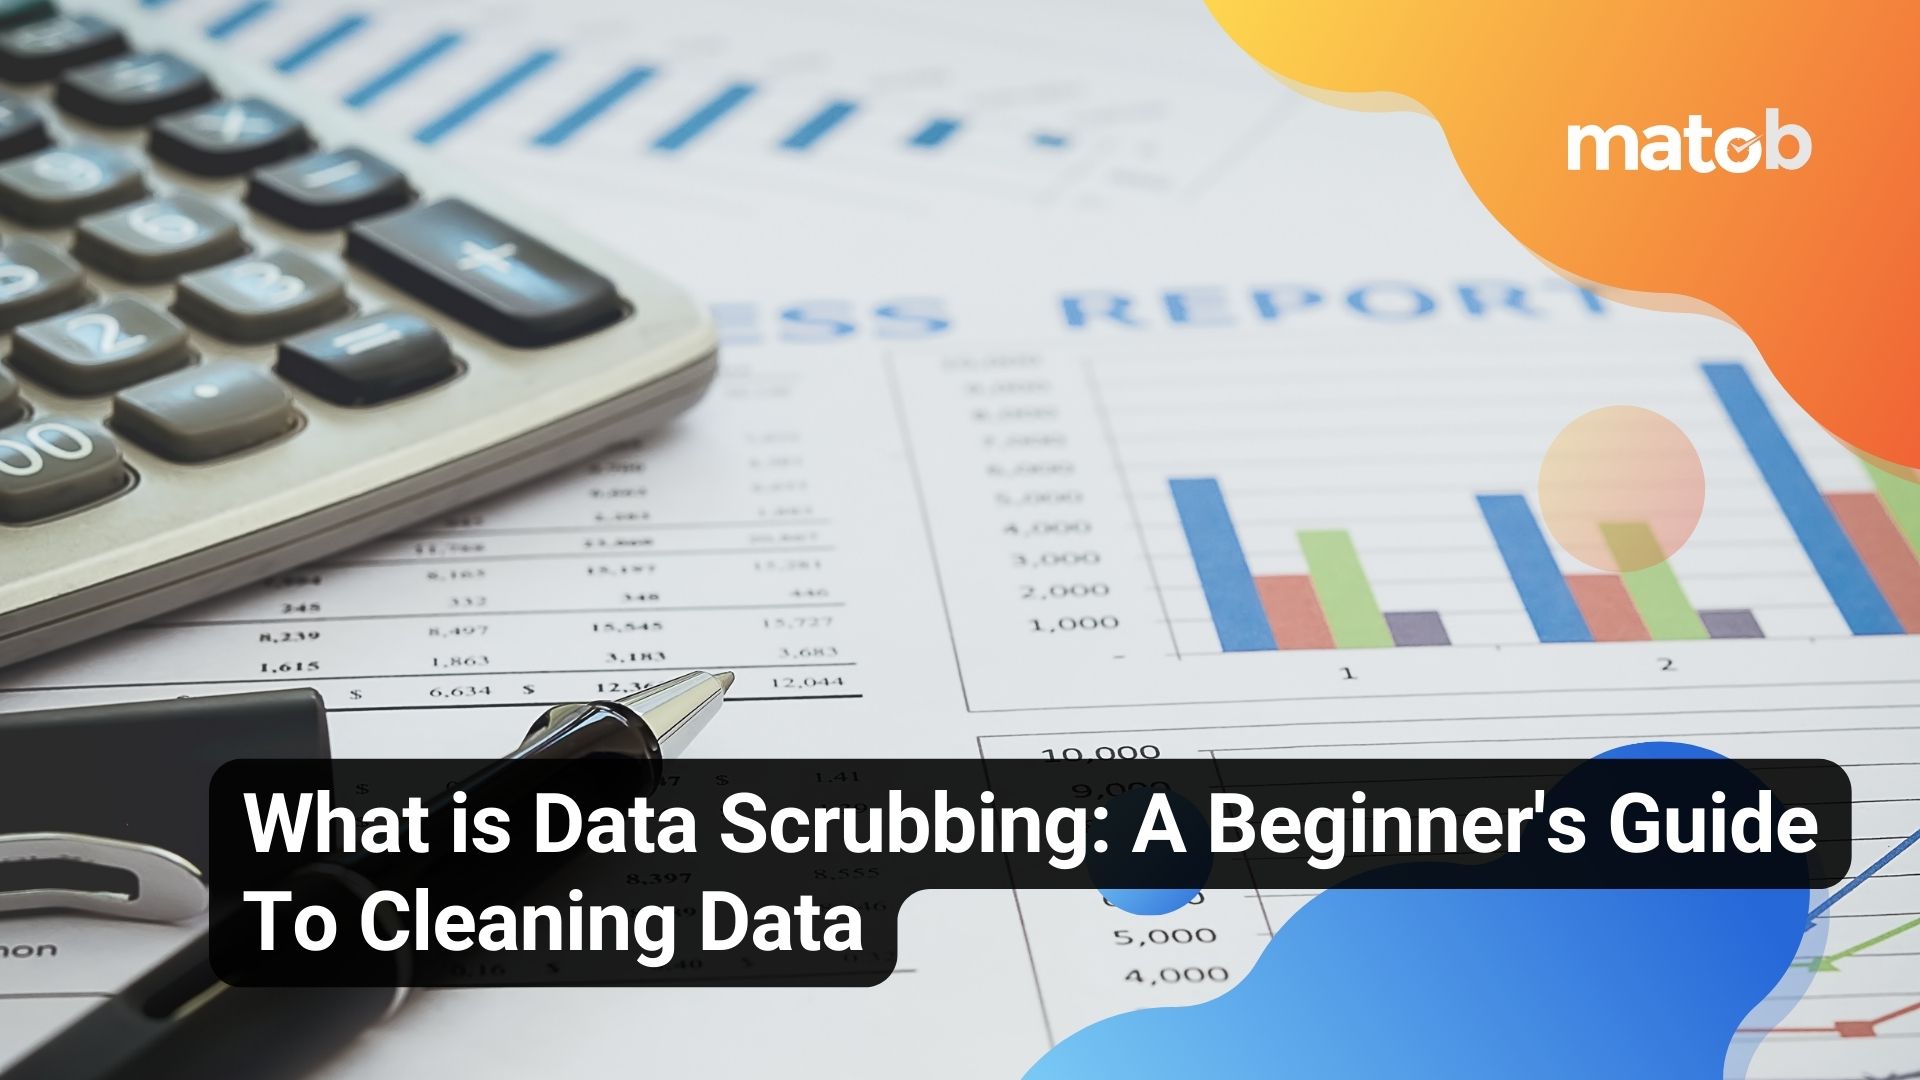 What is Data Scrubbing: A Beginner's Guide To Cleaning Data